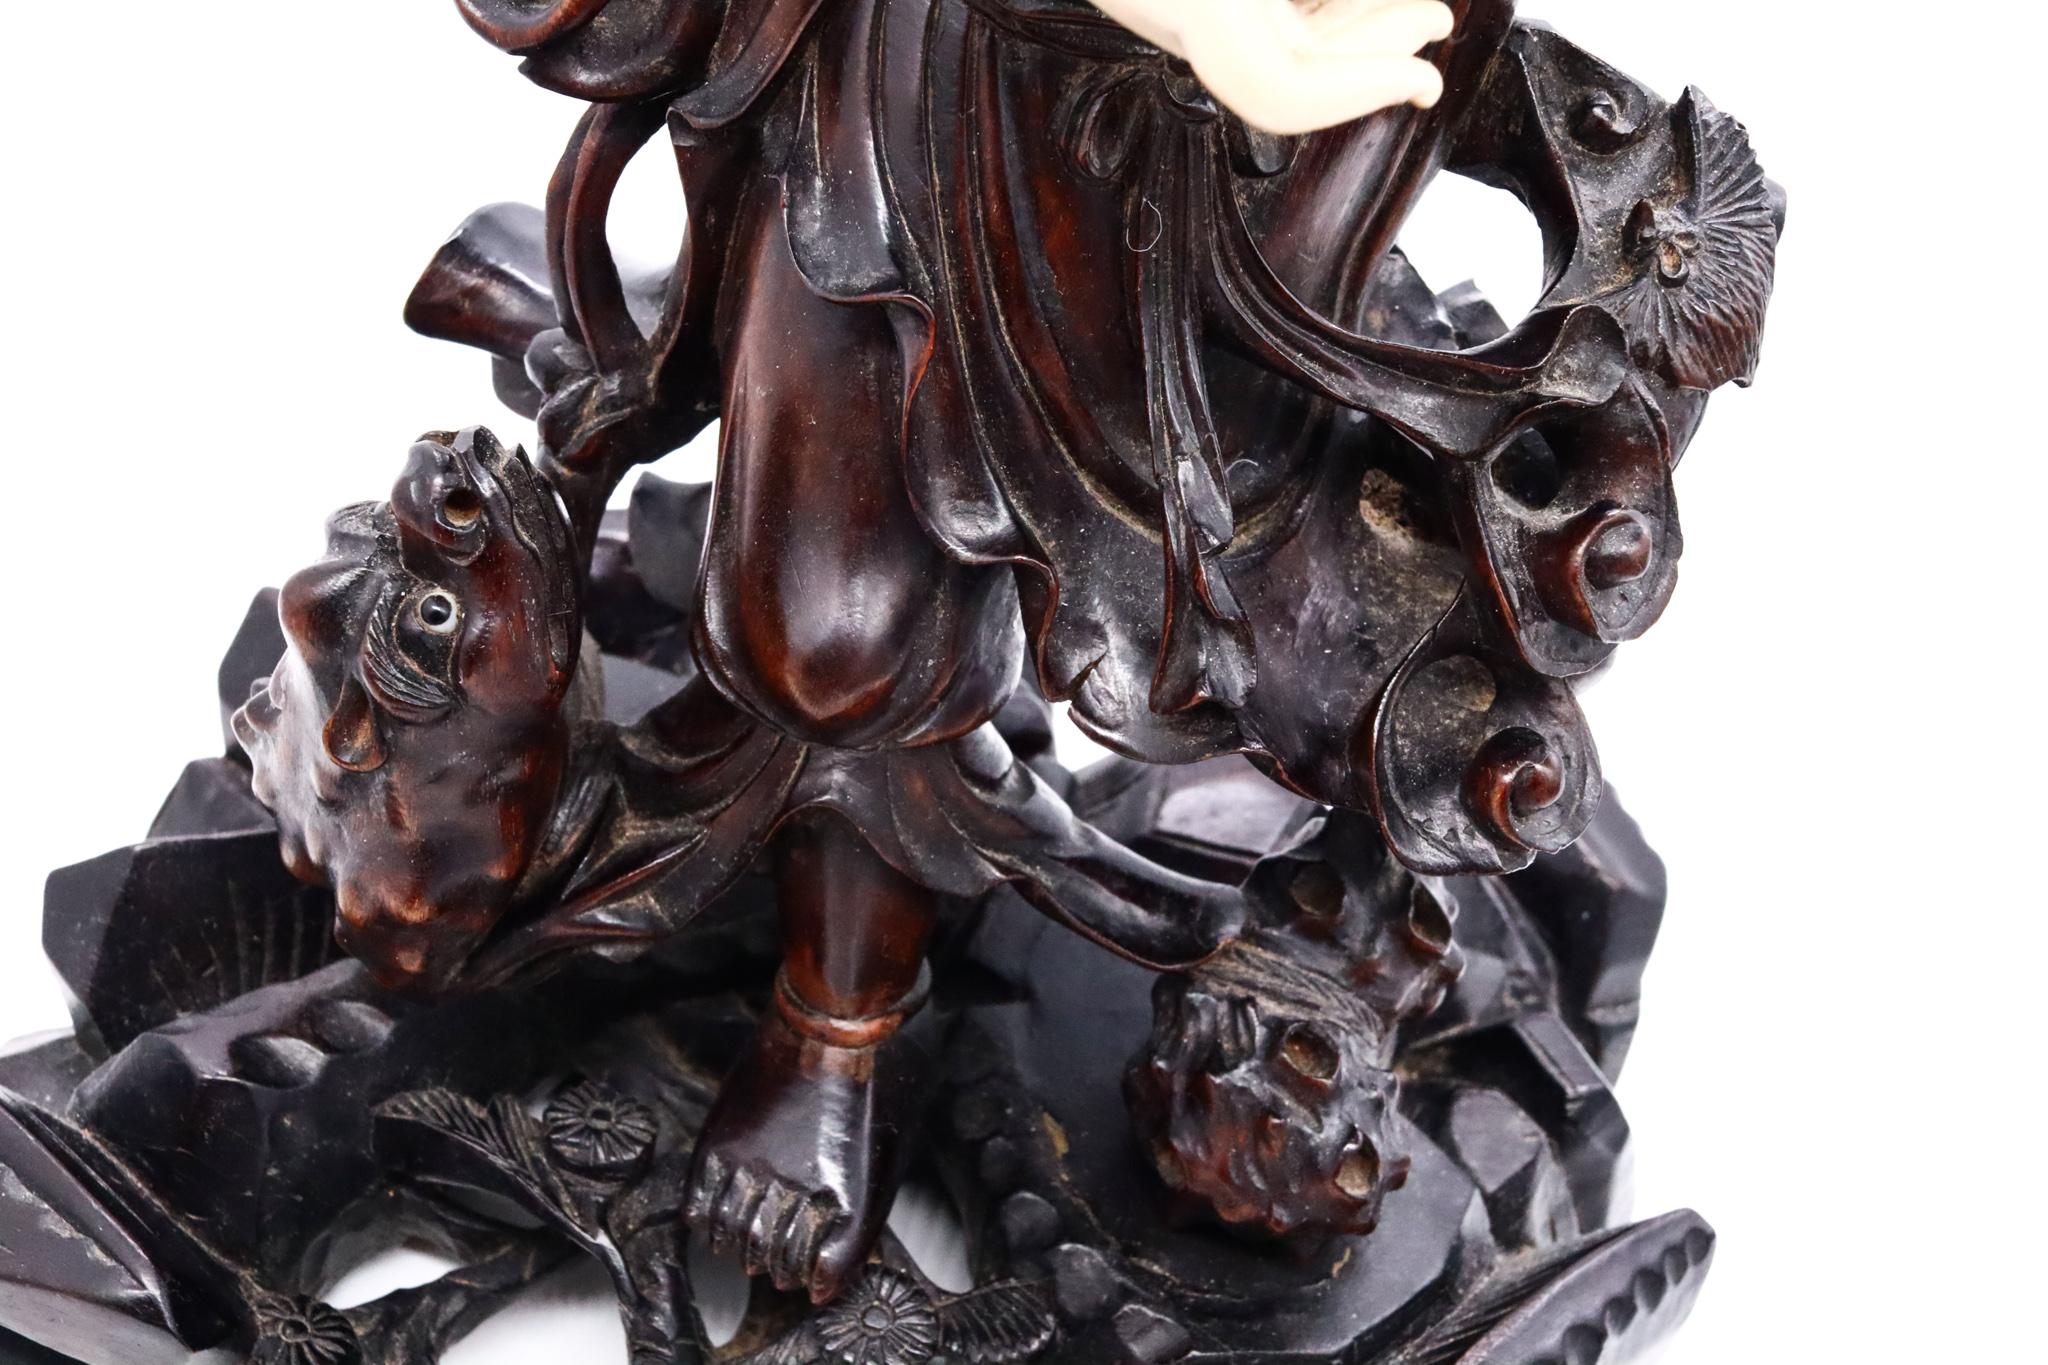 China 1880 Qing Dynasty Sculpture of Liu Haichan Carved in Precious Rose Wood 2